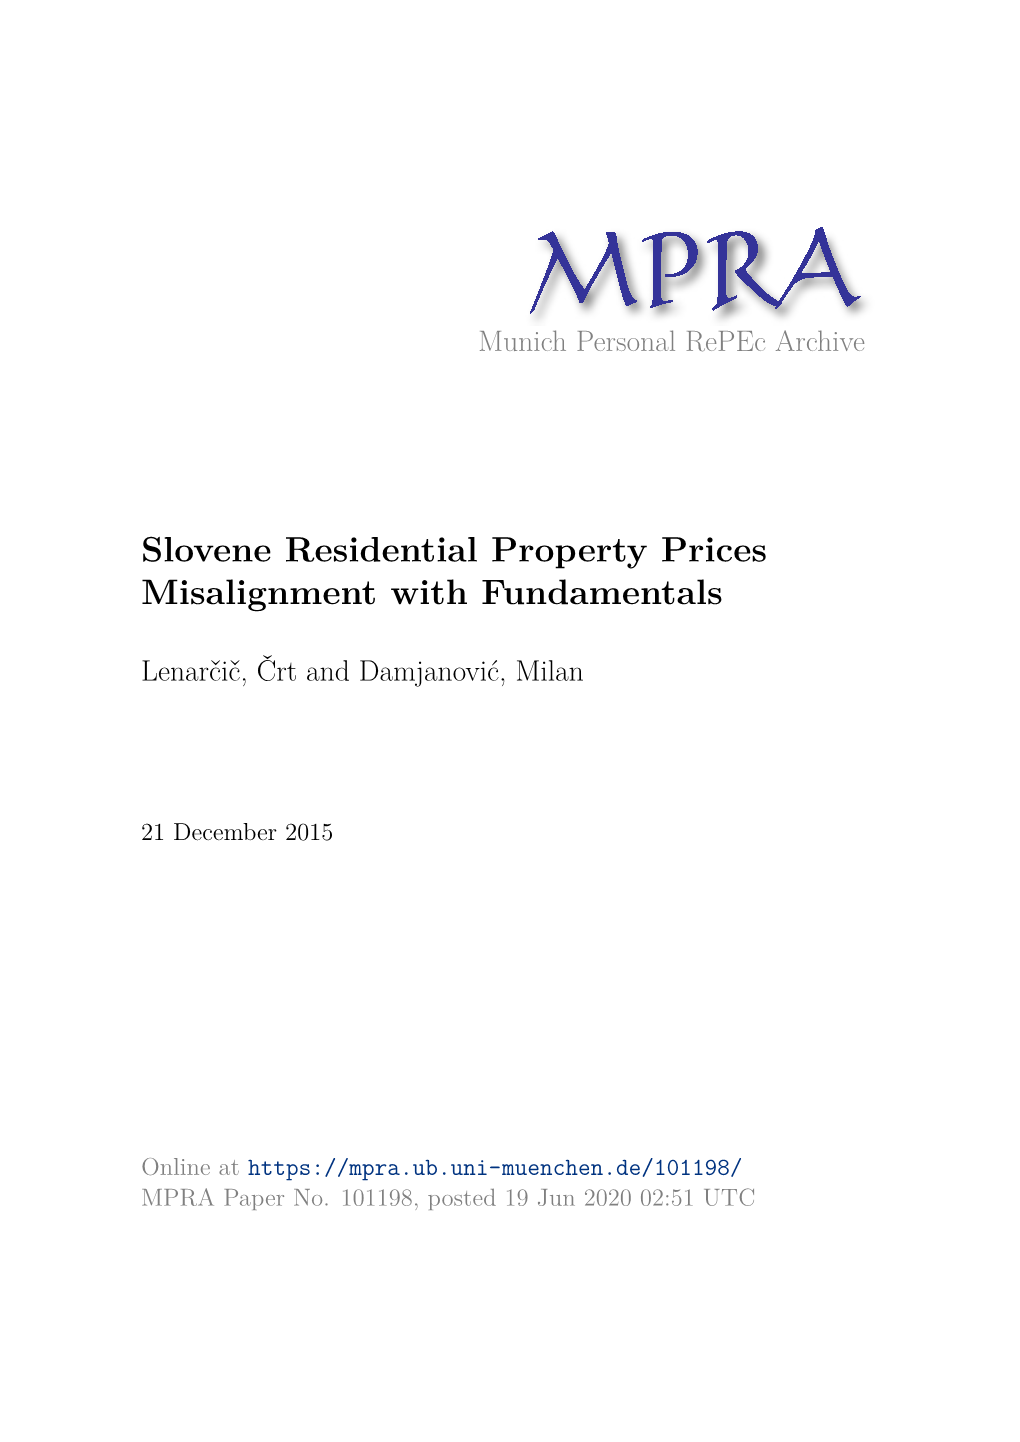 Slovene Residential Property Prices Misalignment with Fundamentals